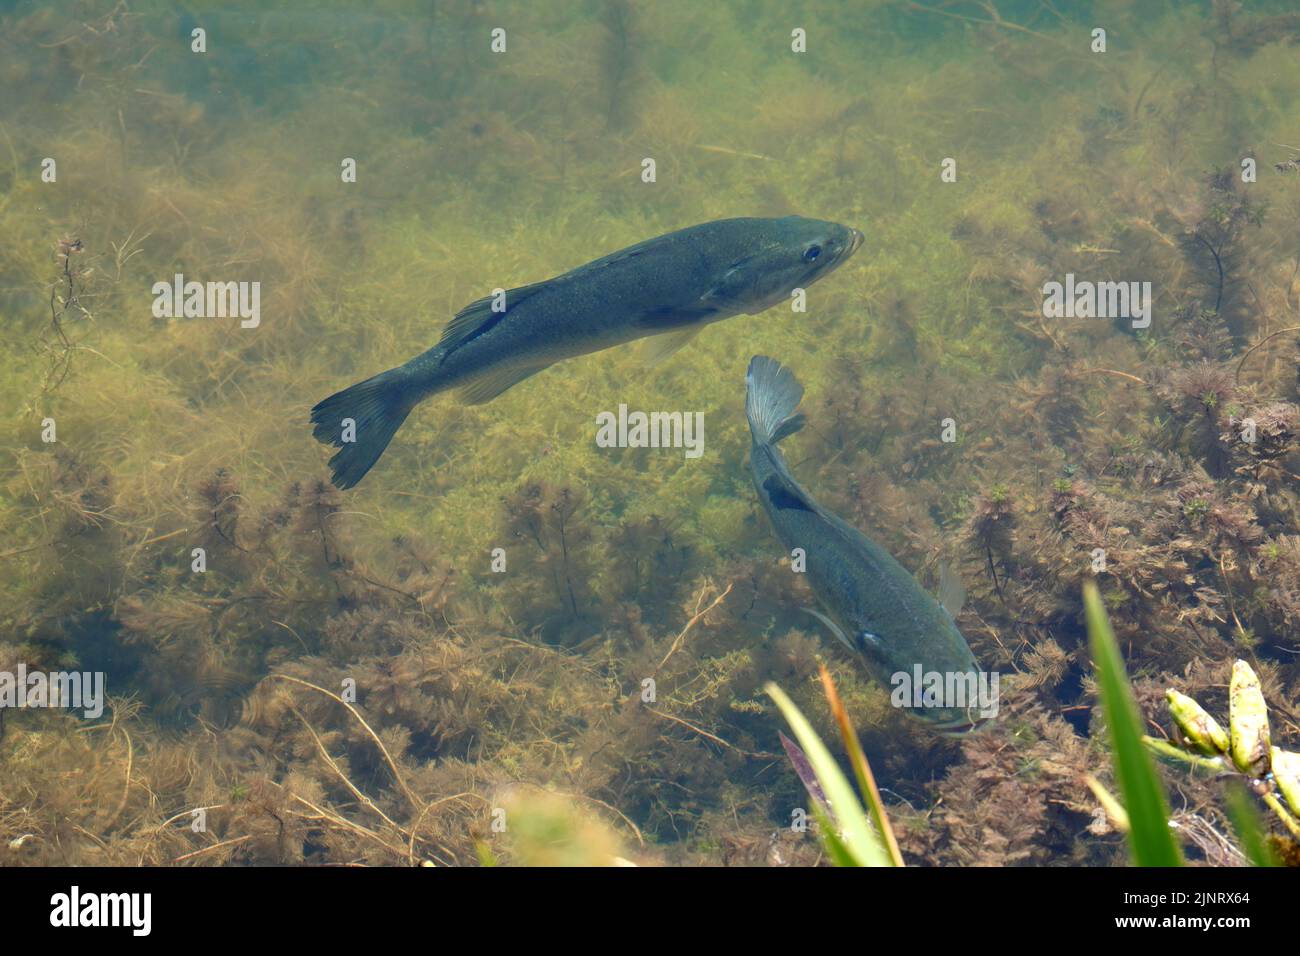 Two Largemouth Bass, Micropterus salmoides, swimming in a lake Stock Photo